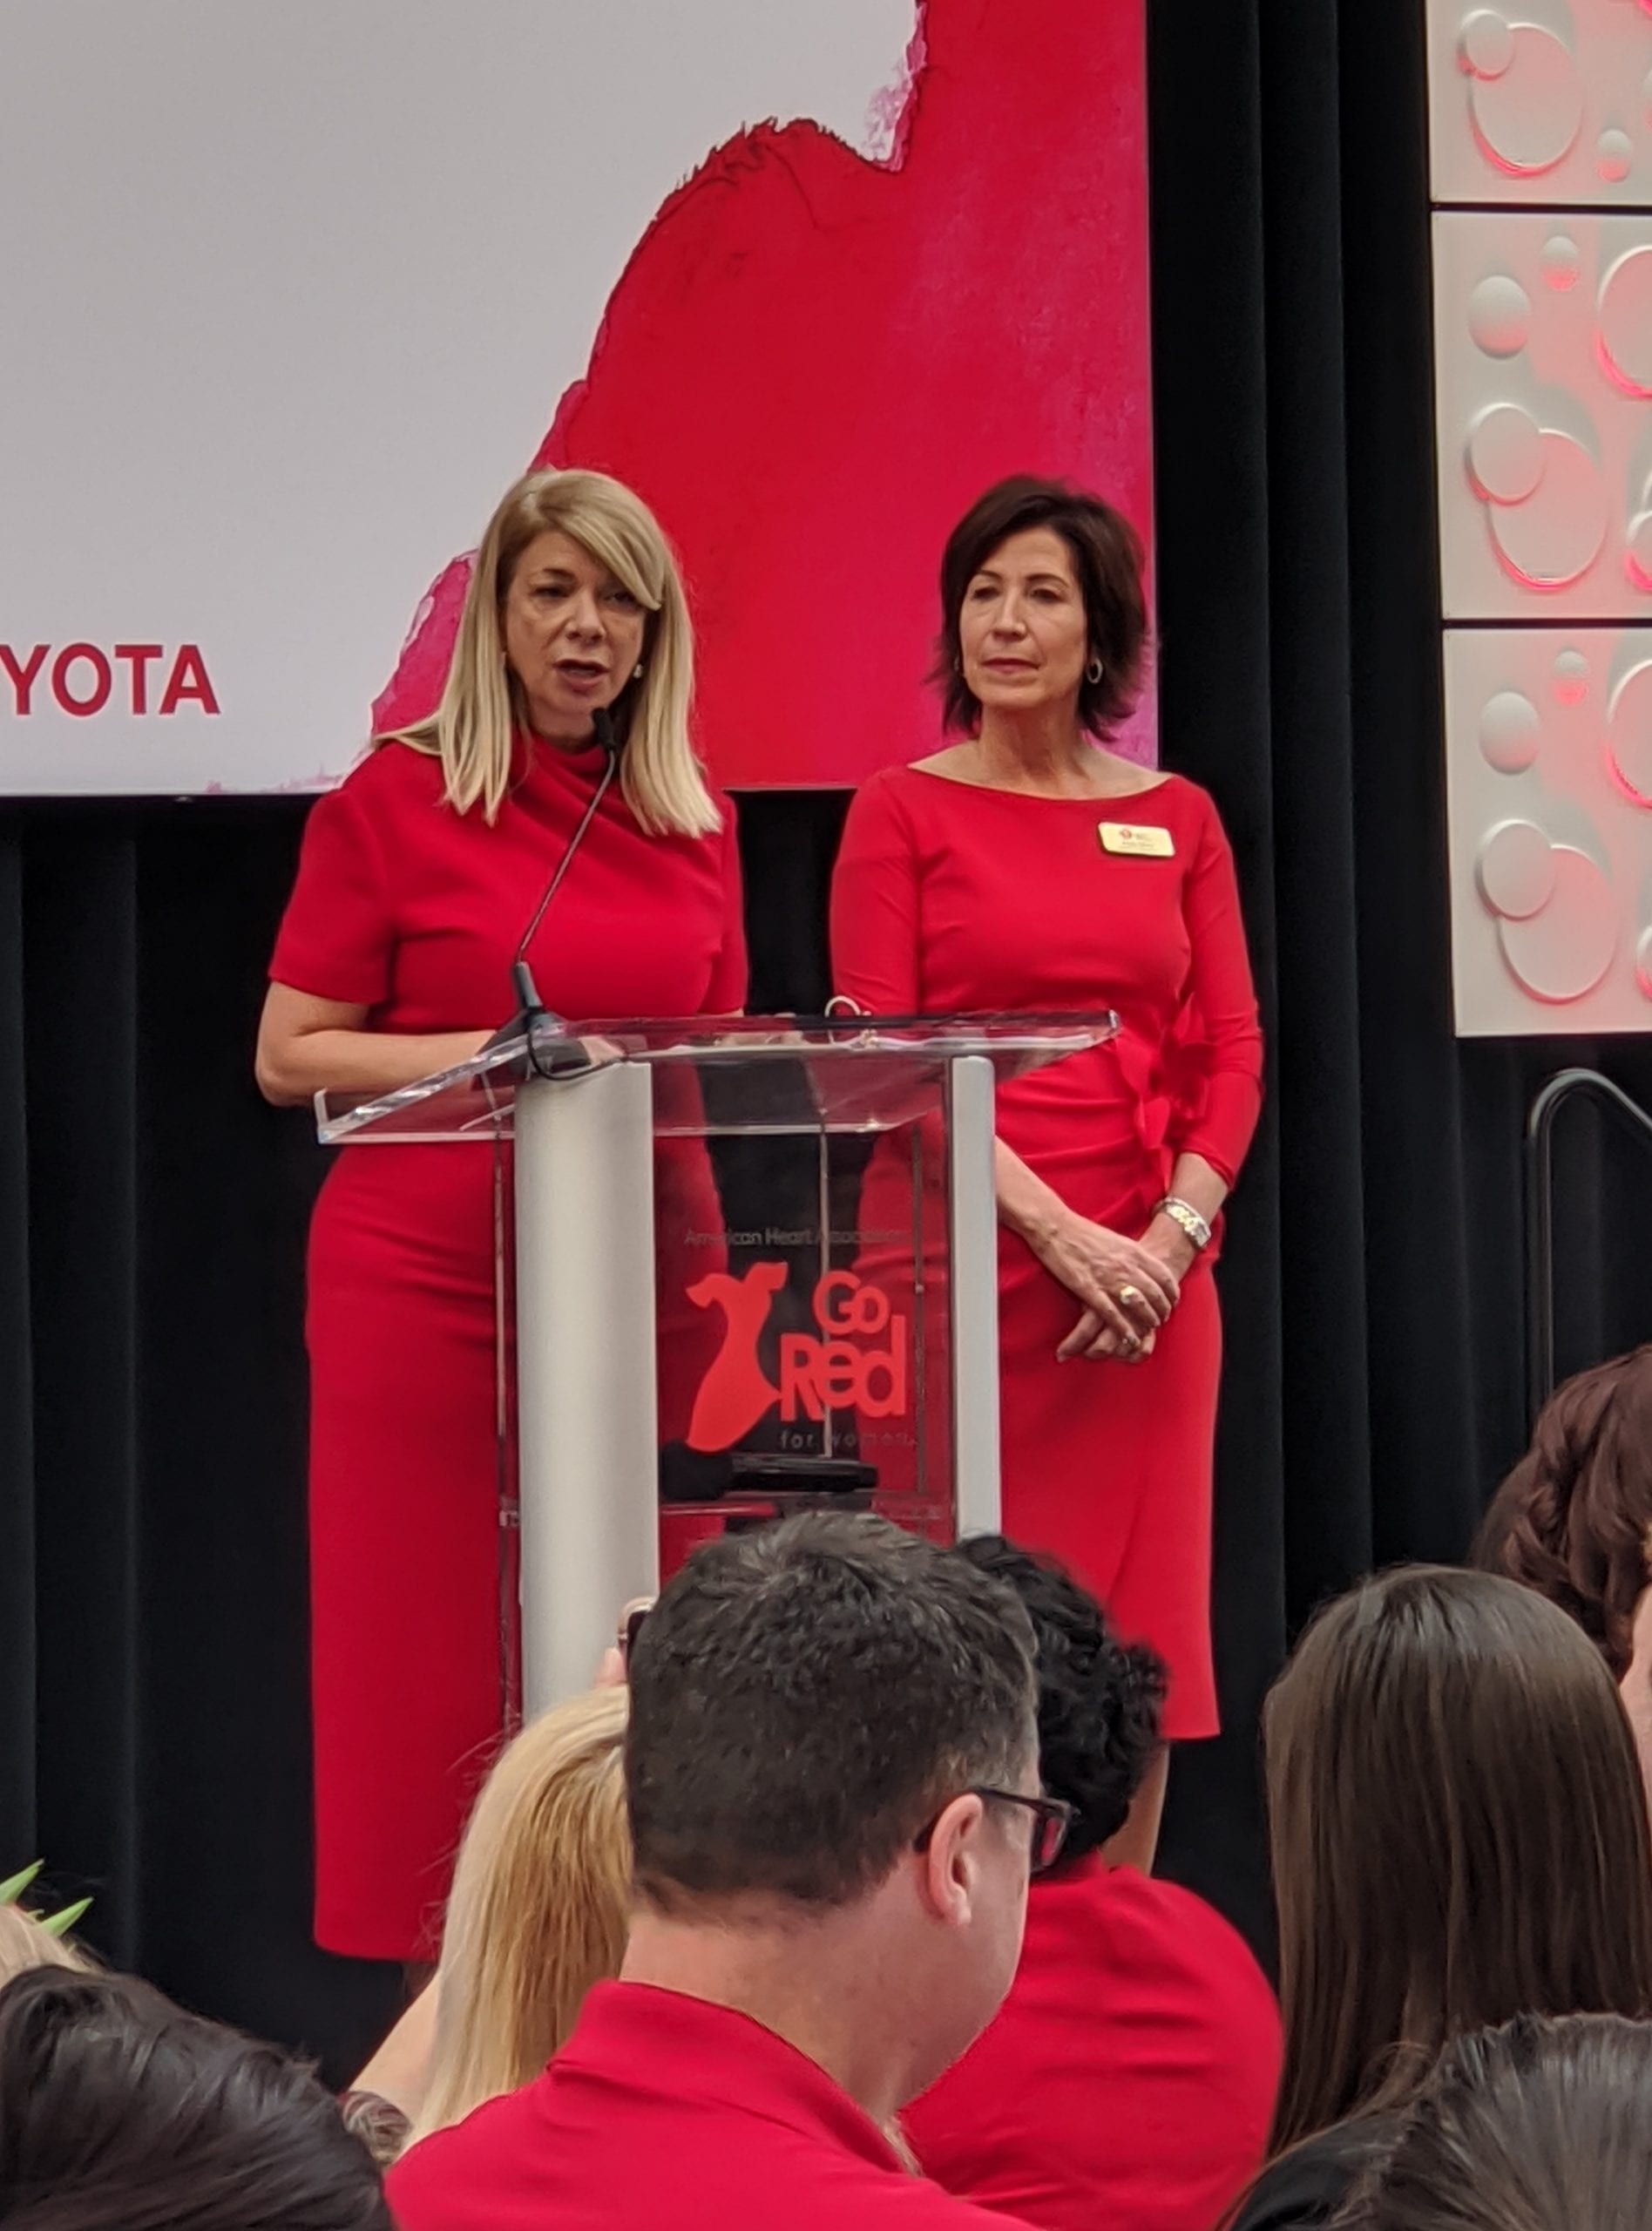 Deborah Greenman,  assistant general counsel at Toyota Motor North America, and Paula Silver, vice president of Corporate Communications for DTE Energy, chaired this year’s “Go Red for Women” Campaign.